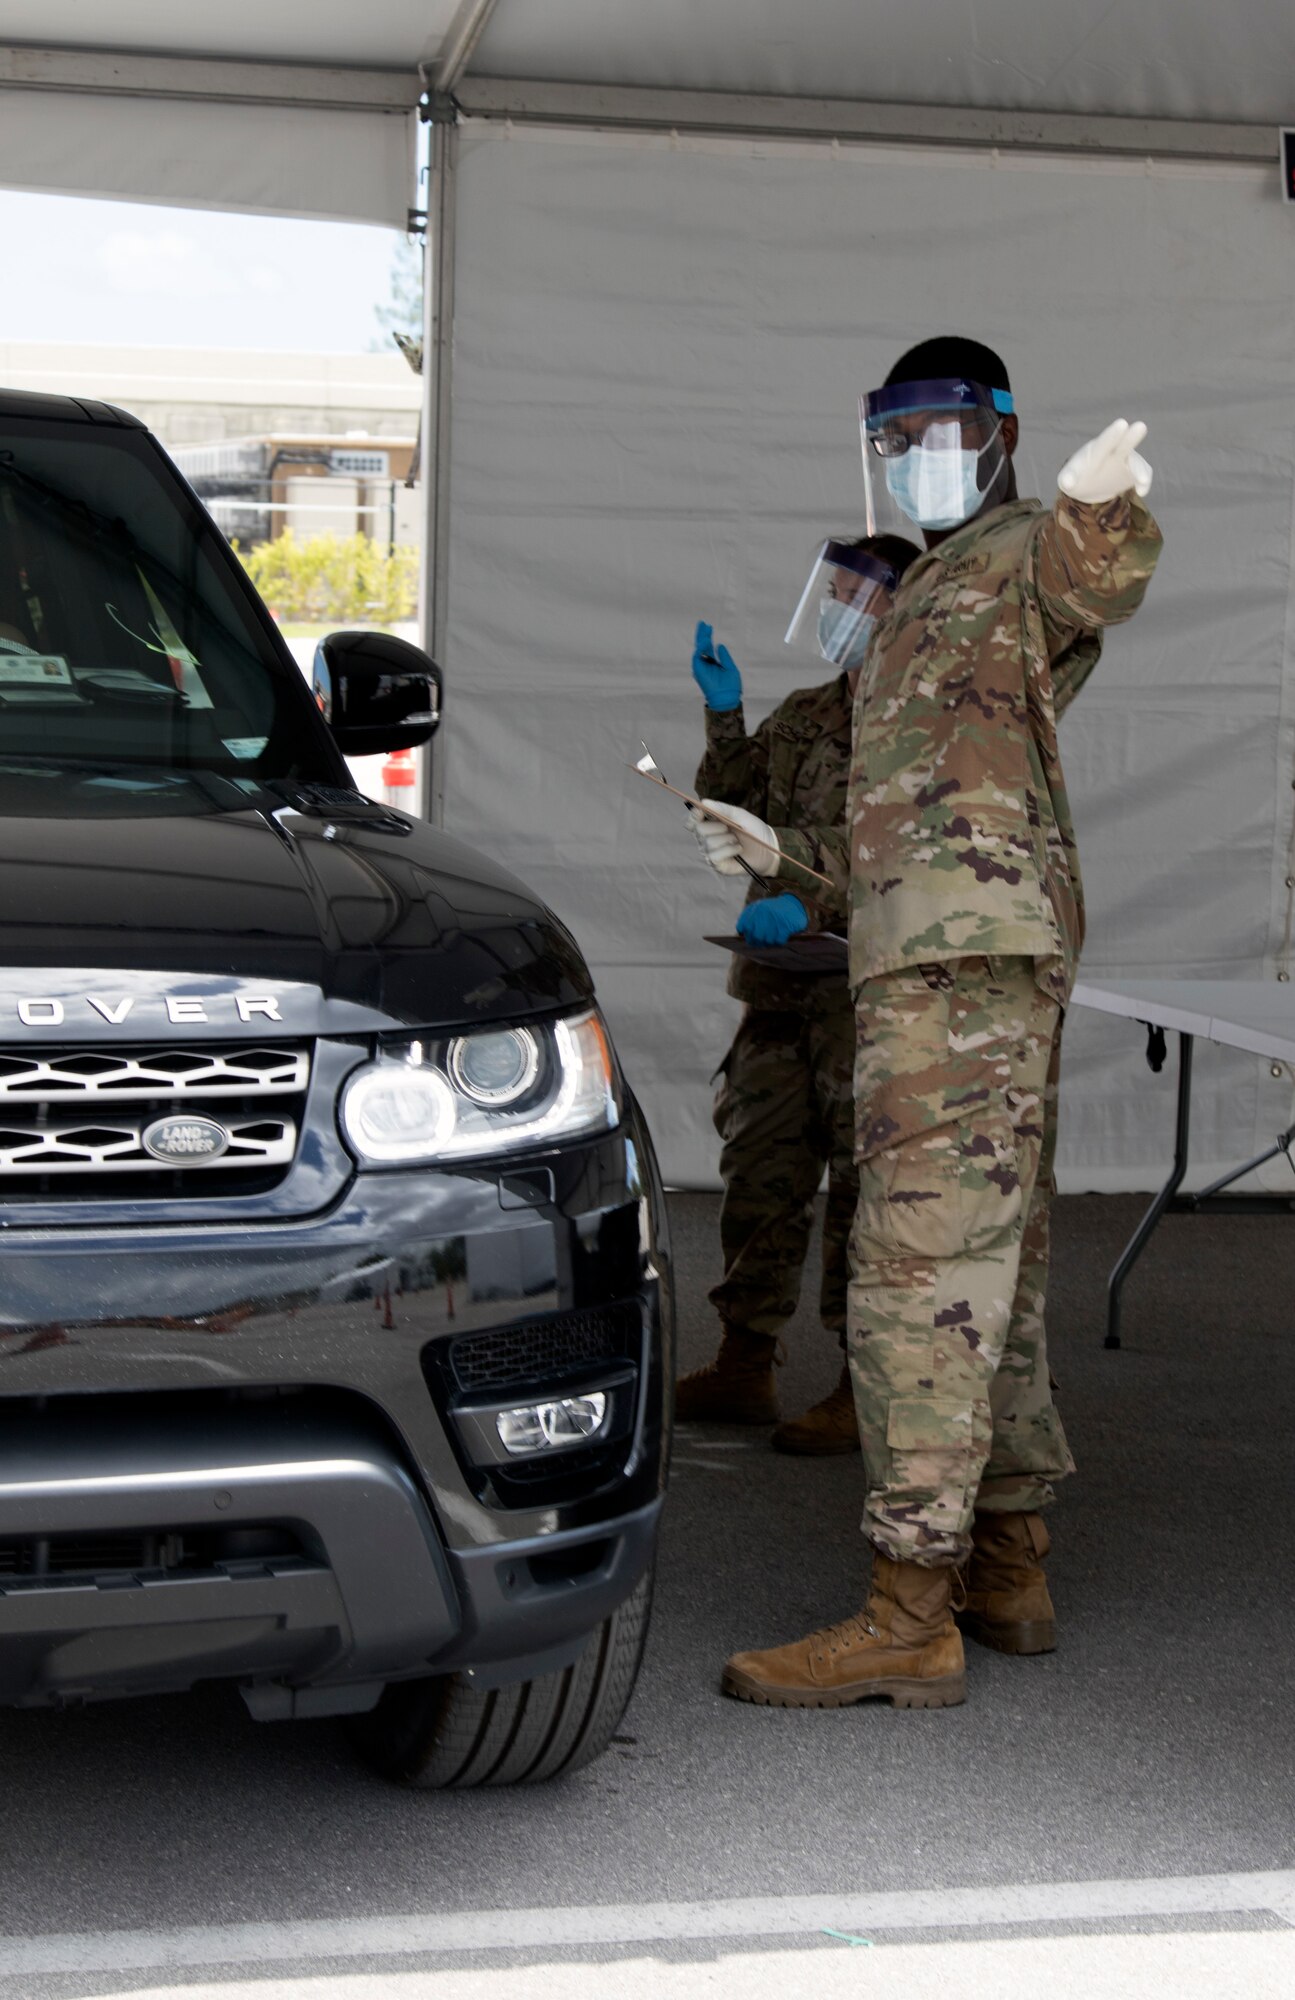 Florida Army National Guard Soldiers from the 1218th Transportation Company, West Palm Beach, scribe patient information during COVID-19 testing at Hard Rock Stadium in Miami Gardens March 23, 2020. The testing site is the second set up by the Guard in South Florida.